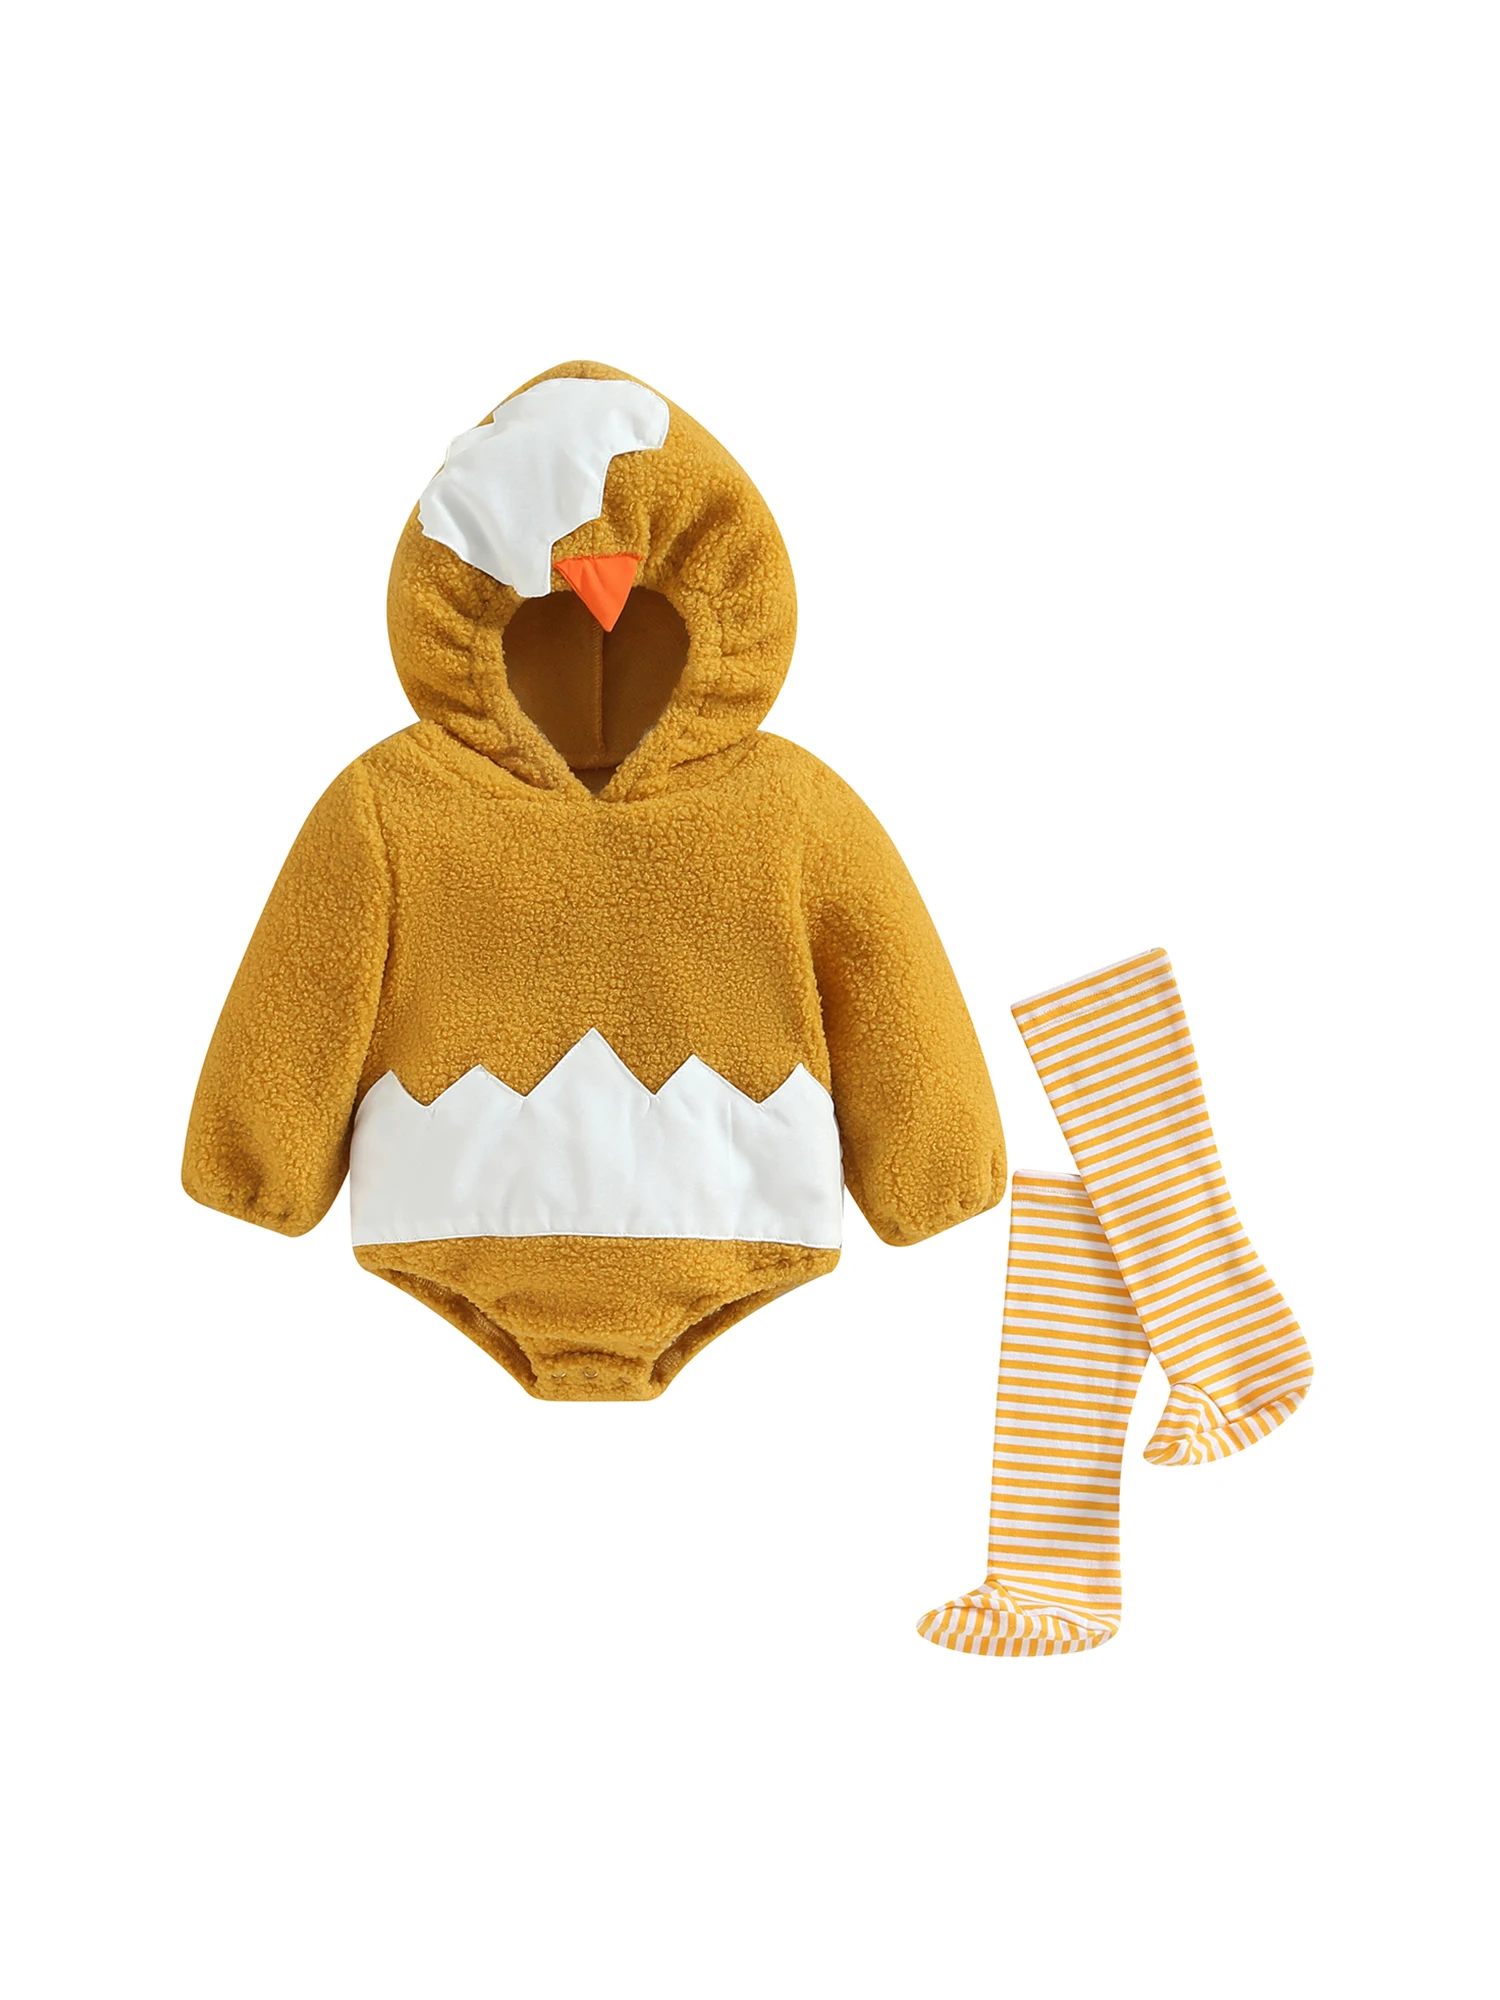 

Adorable Infant Halloween Costume Set with Hooded Romper and Leggings - Choose from Avocado Pineapple Fruit or Pumpkin